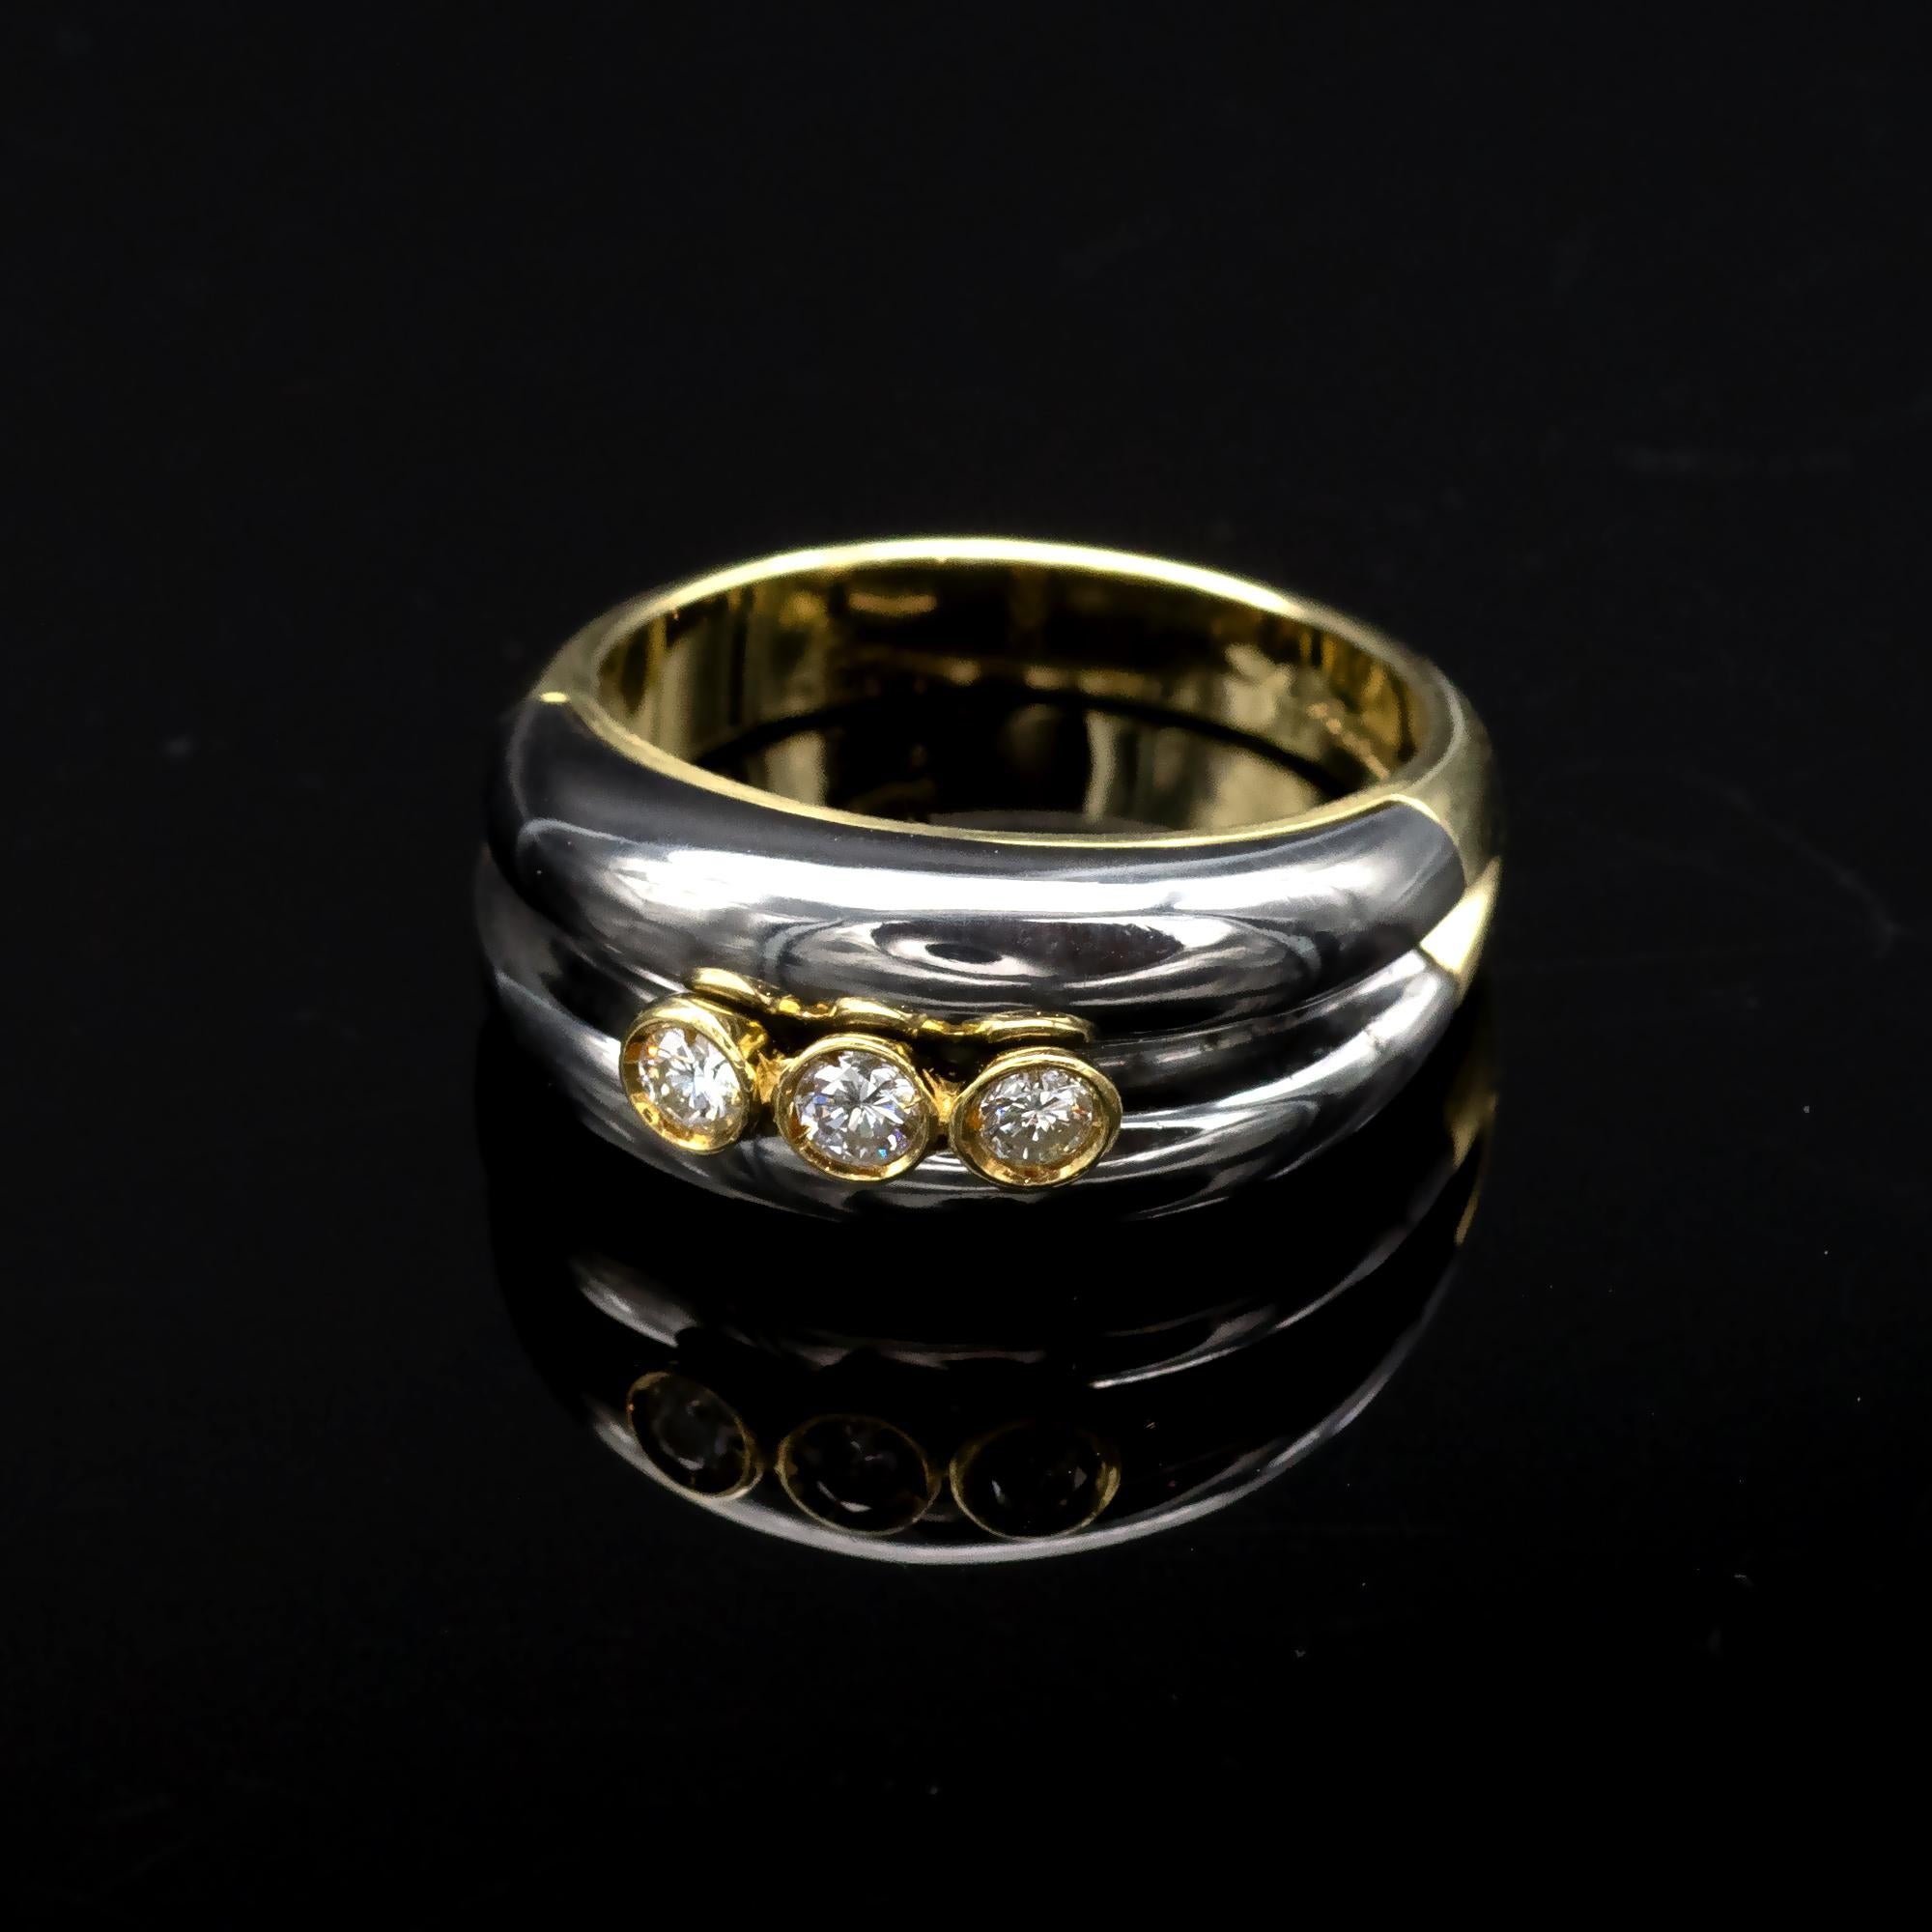 Stylish two tone - yellow a black rhodium 18 Karat gold - diamond ring.
Three diamonds are bezel set in a yellow gold element inlayed in a polished black rhodium gold. The ring is made of several elements expertly adjusted and assembled. 
The design